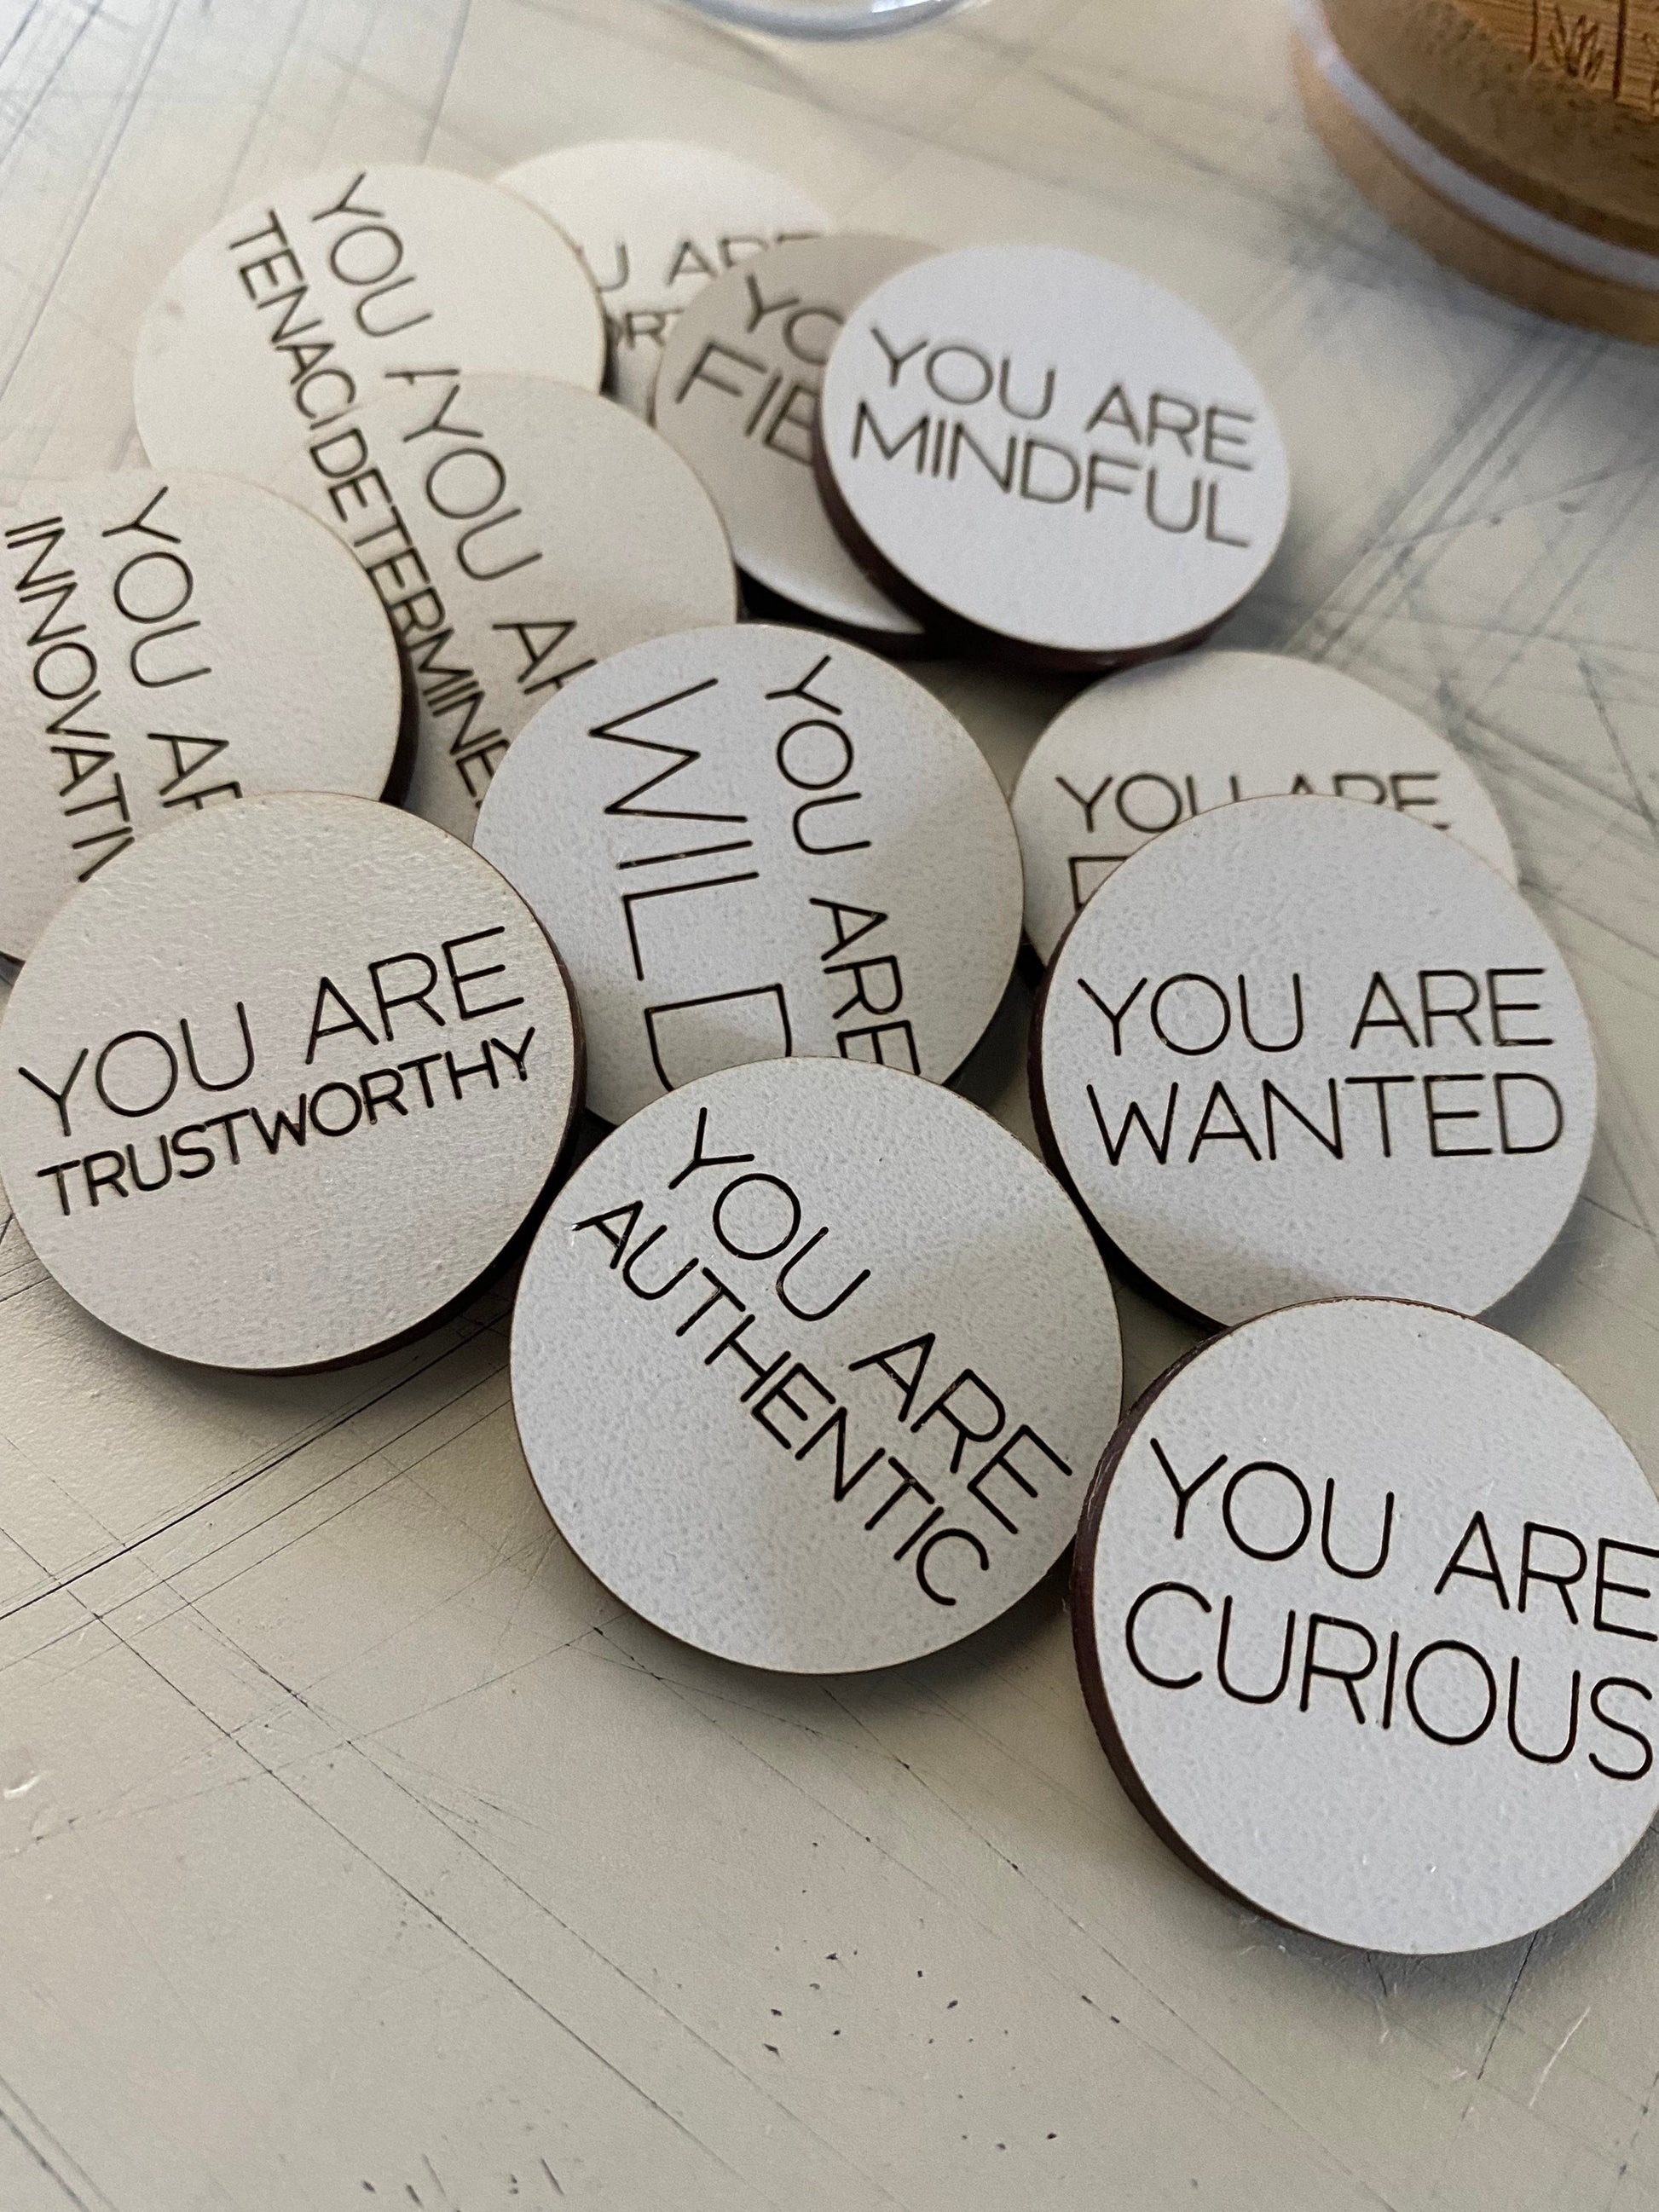 Truths about you positive affirmation tokens - 12 add-on tokens to the Truths About You set